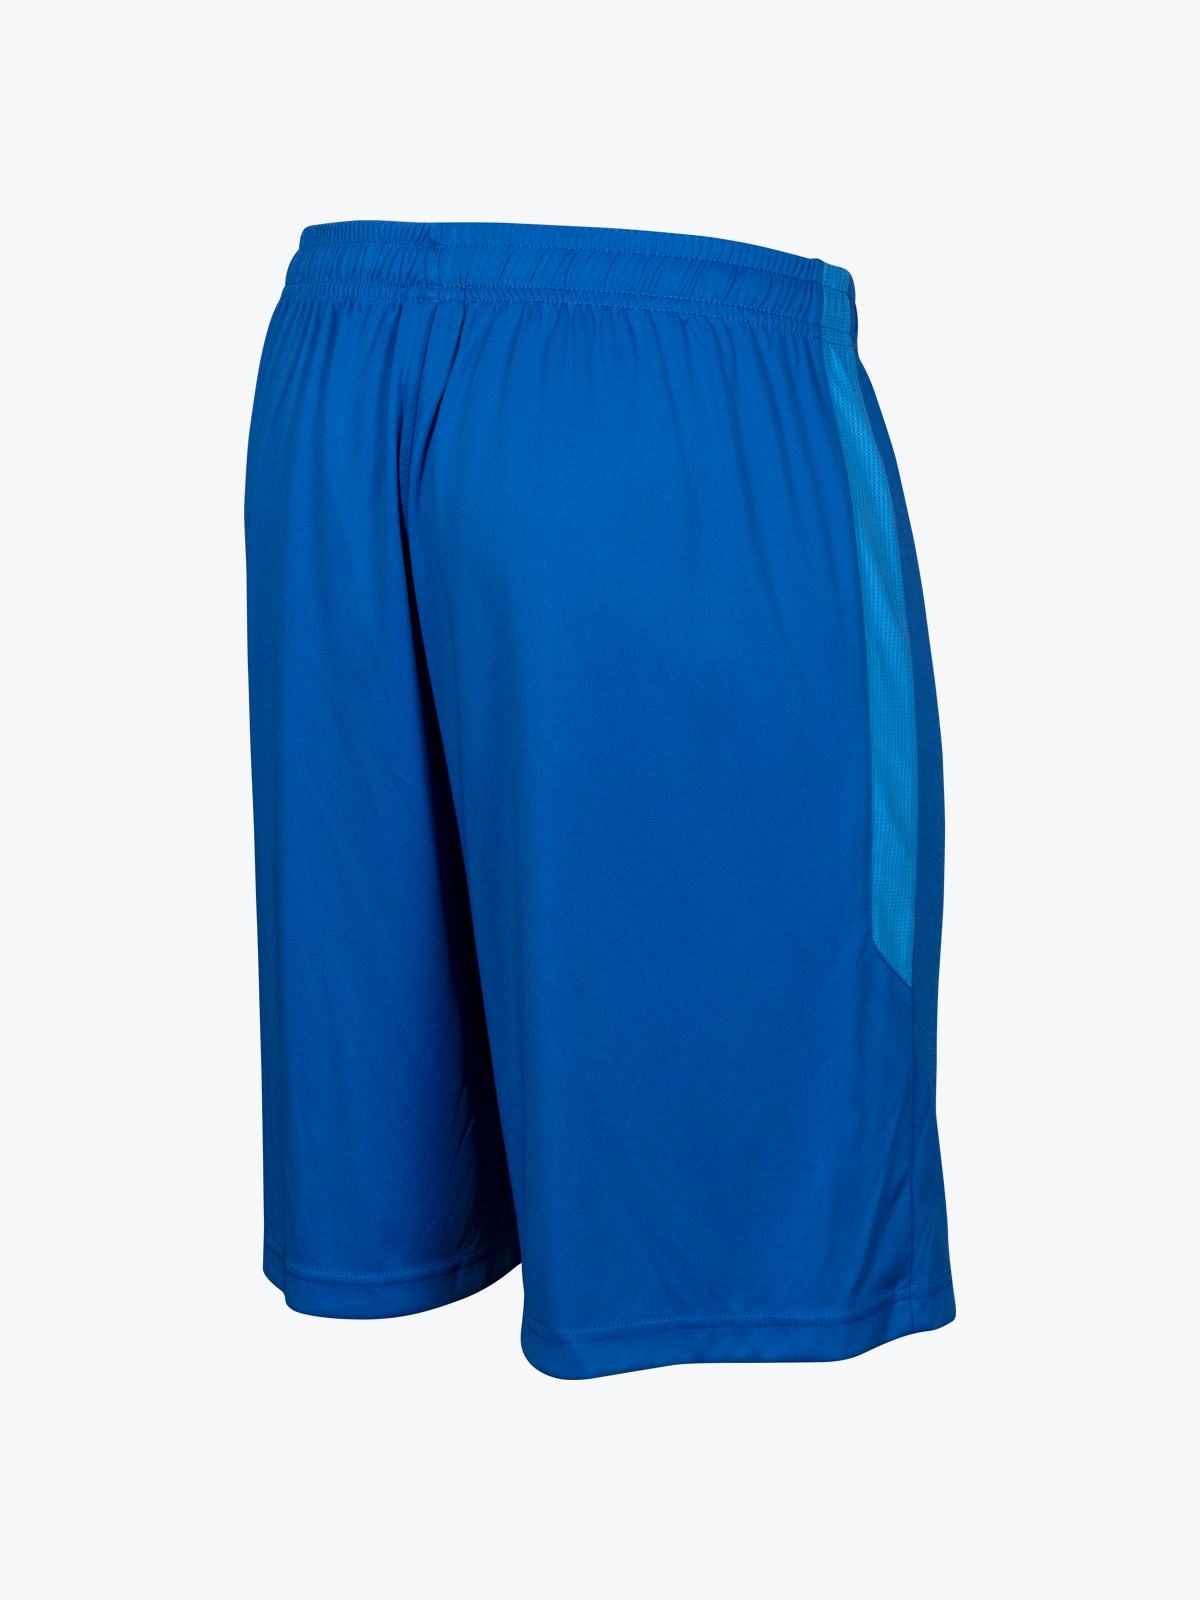 picture of retro short - royal